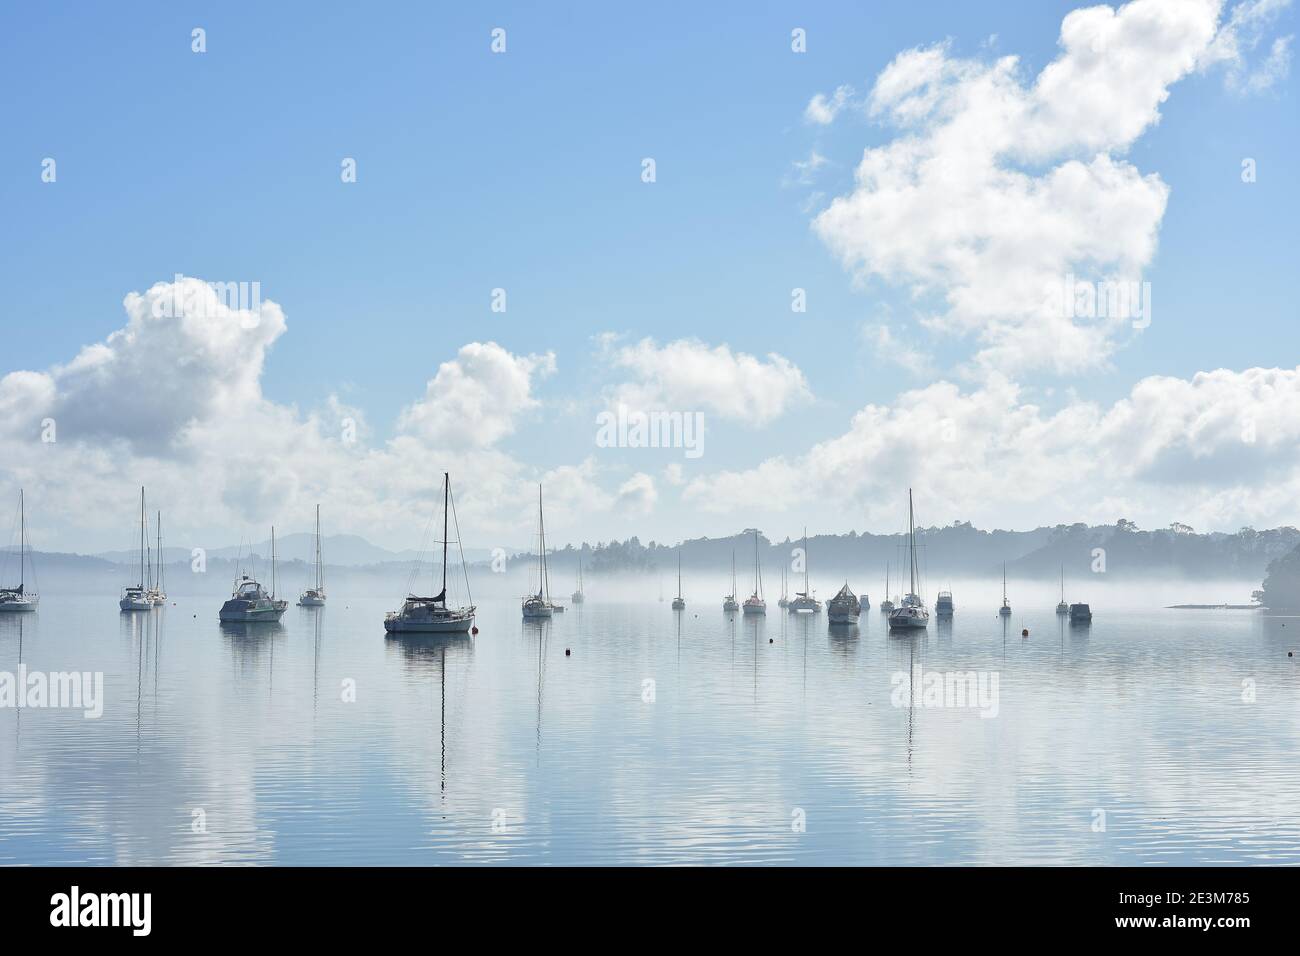 Moorage with recreational vessels in calm harbour emerging from morning low lying fog. Stock Photo